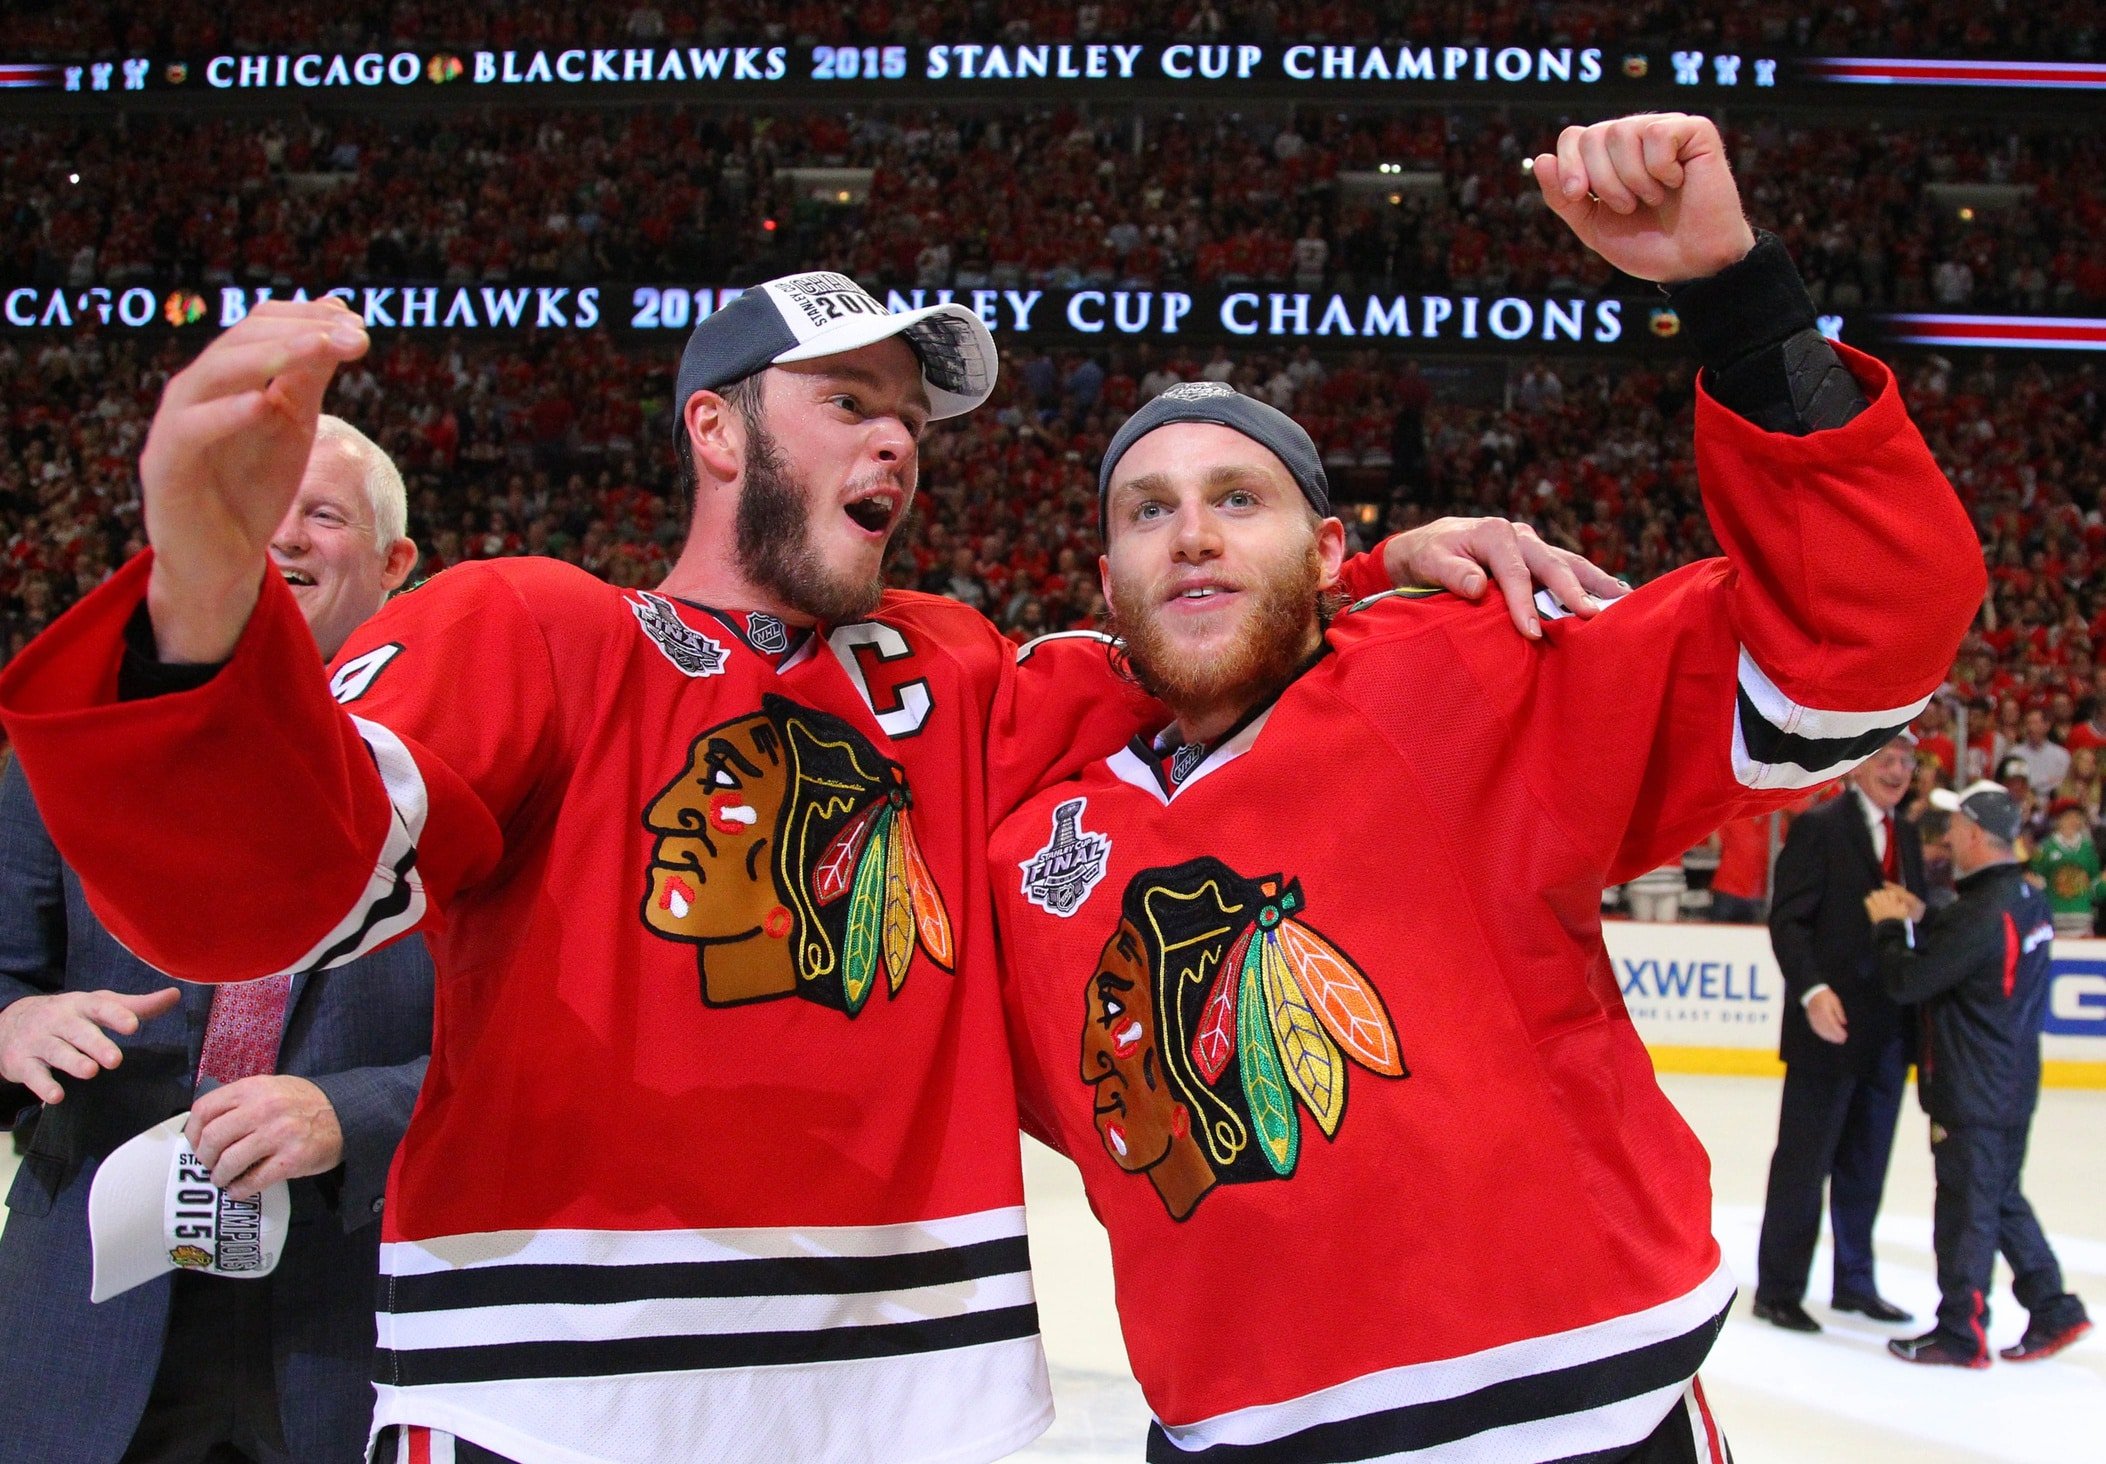 Patrick Kane on X: I will forever be proud to be a Blackhawk and